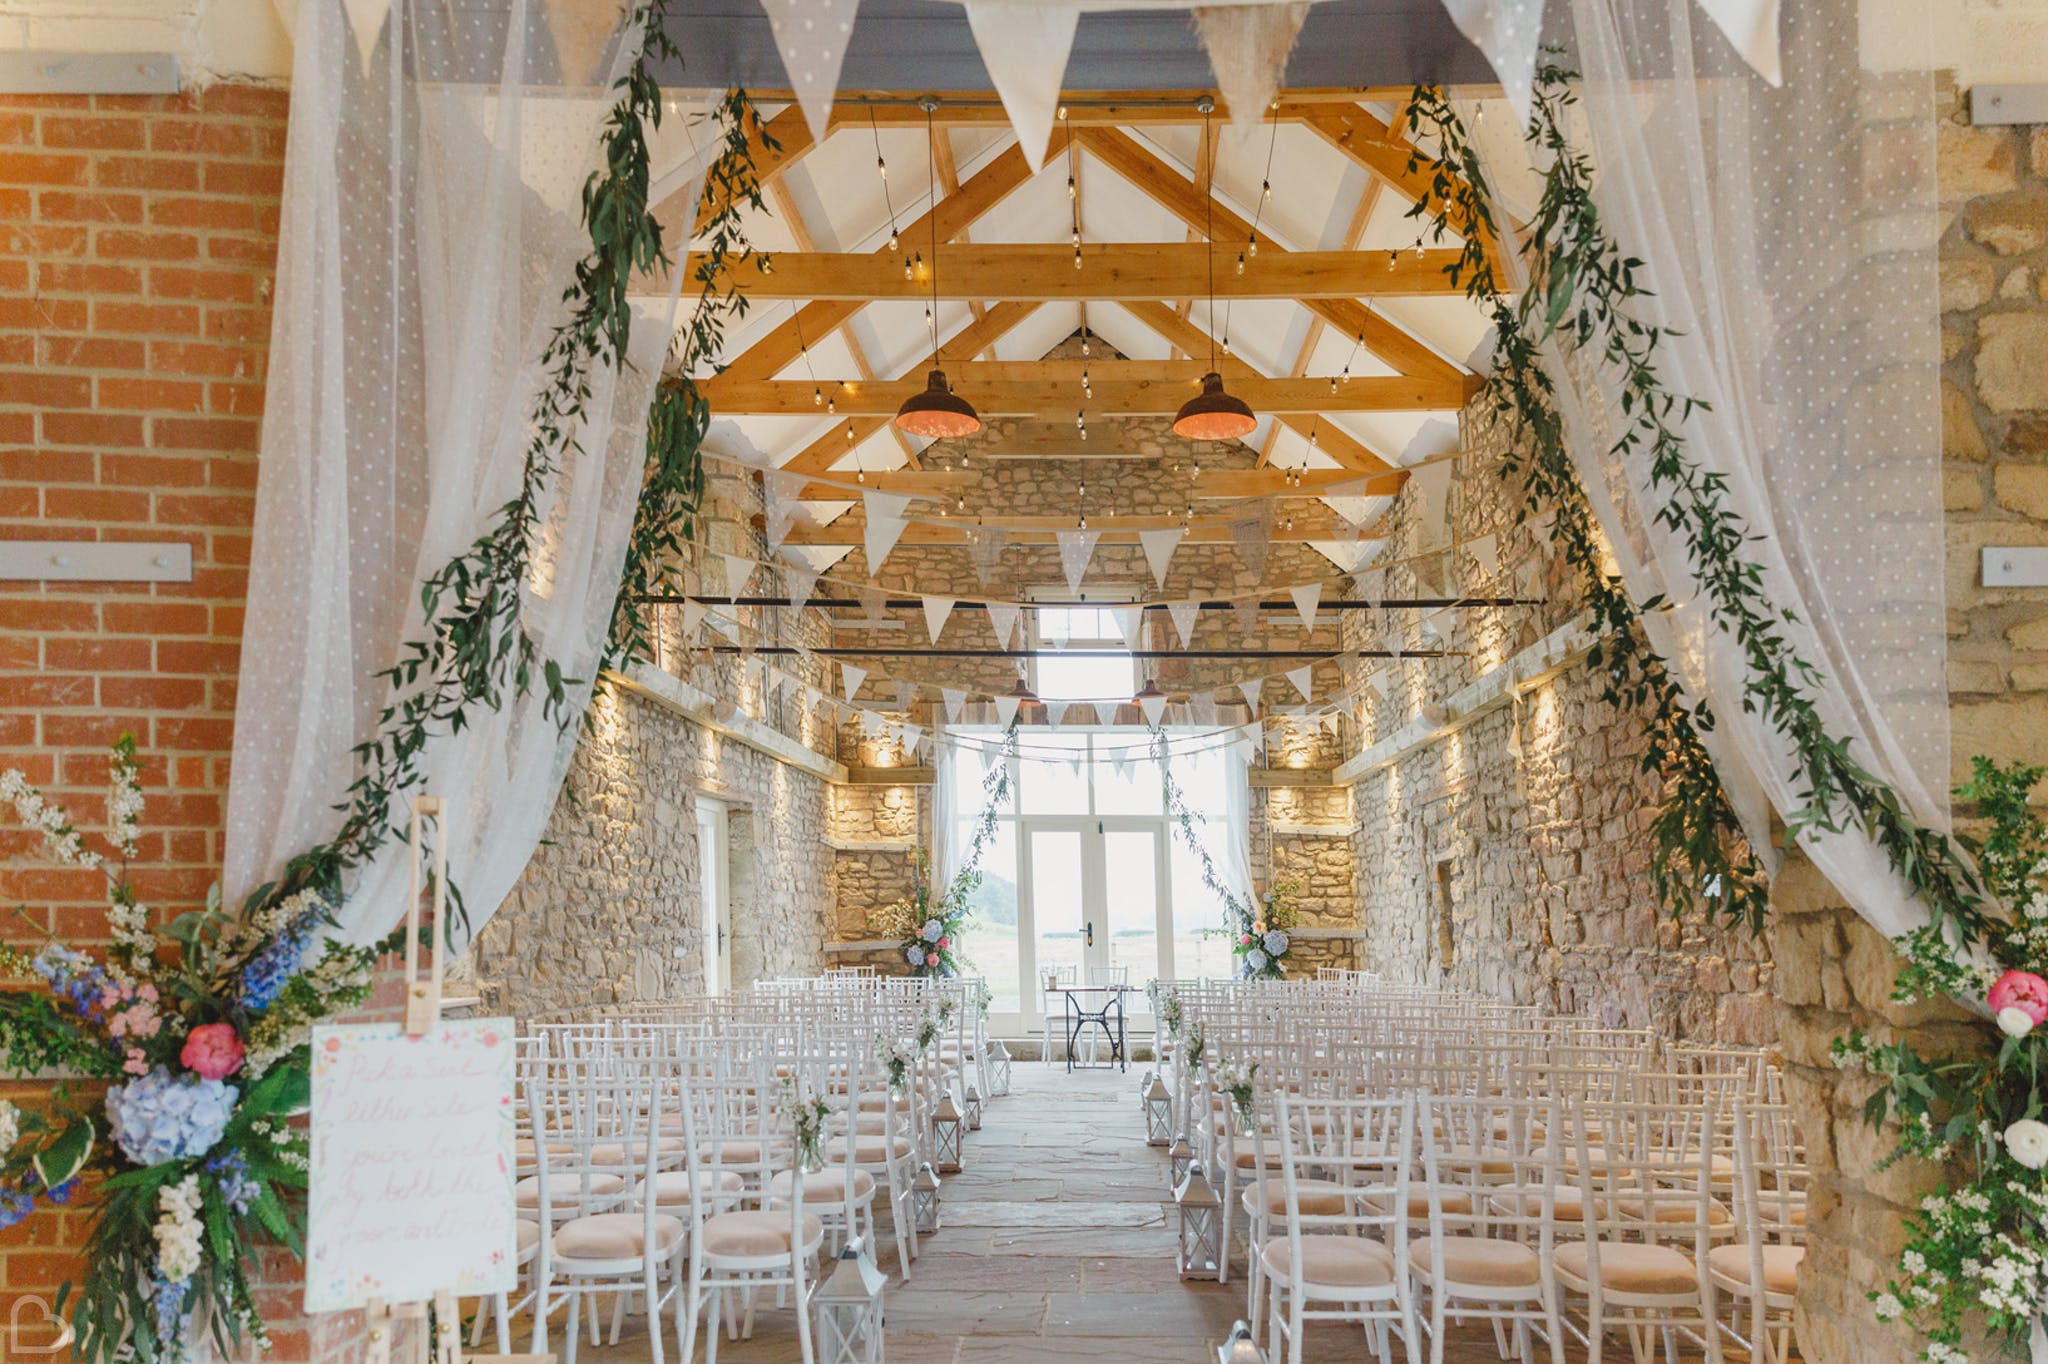 northside farm wedding venue ready to receive guests for ceremony